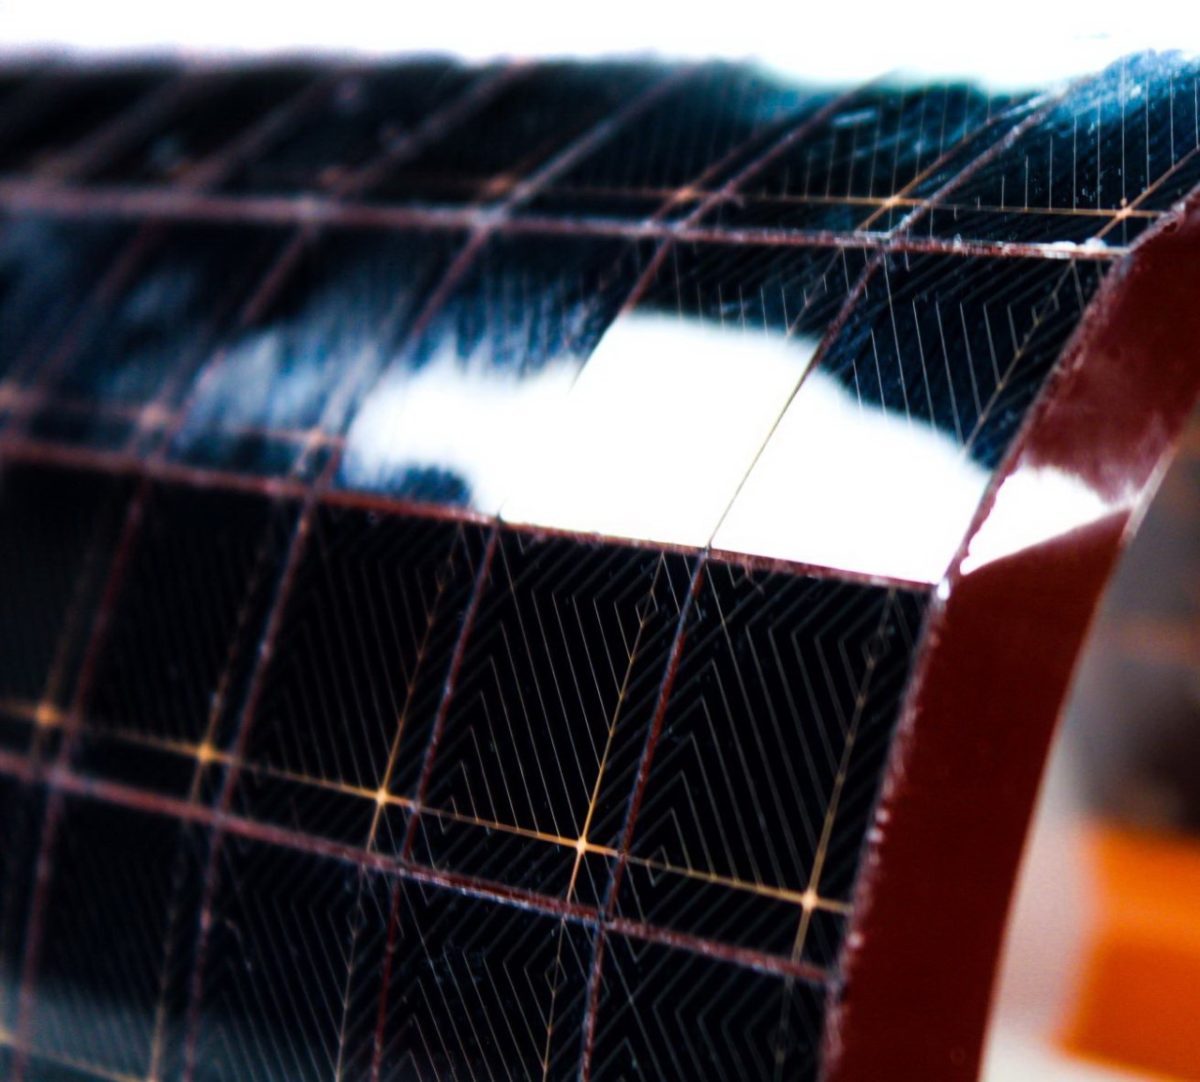 Flexible PV panels based on hyperconnected back-contact solar cells